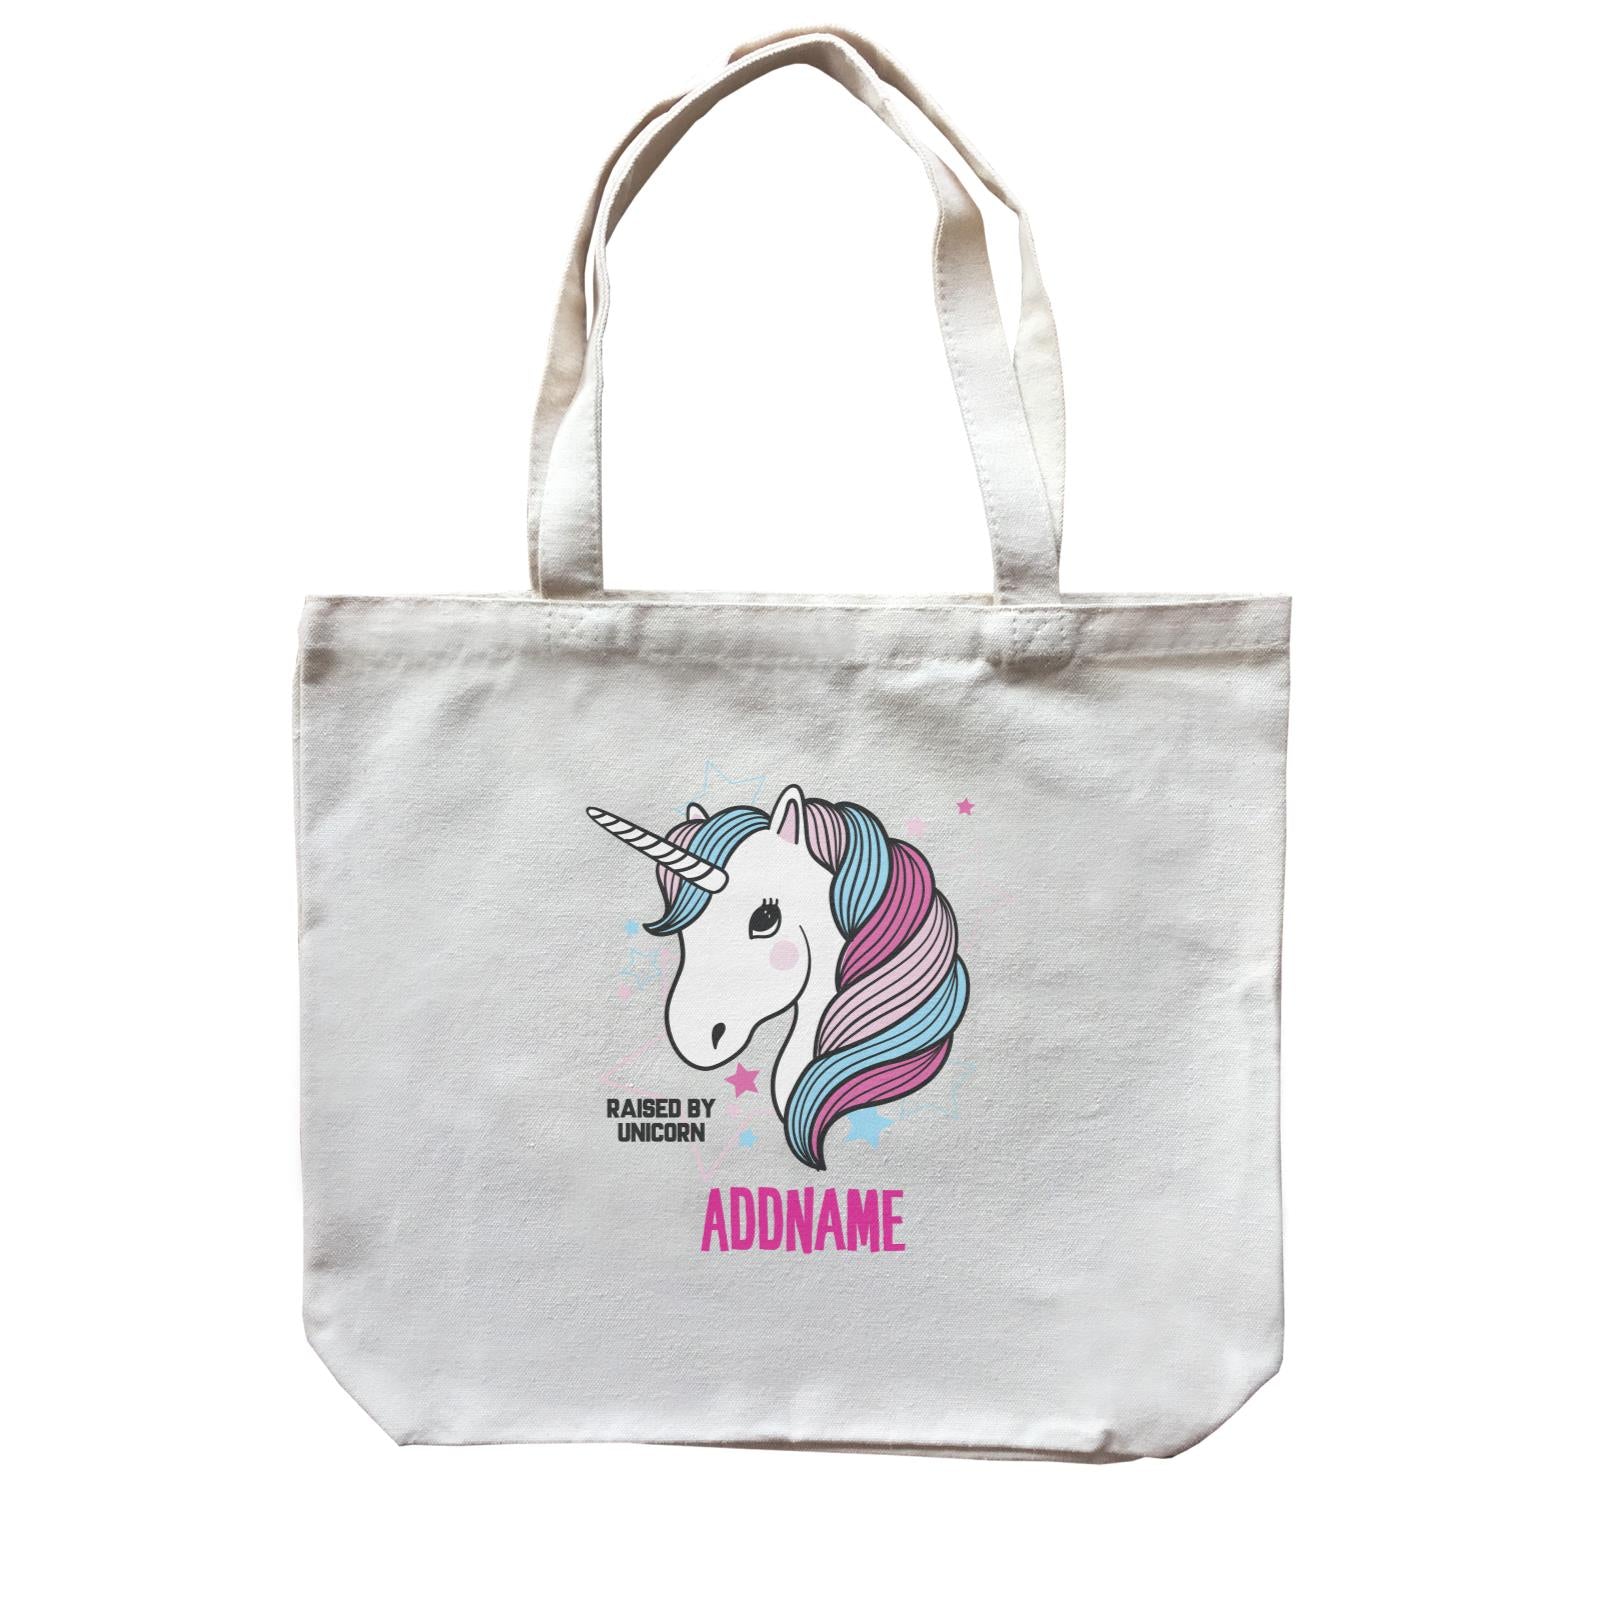 Cool Vibrant Series Raised By Unicorn Addname Canvas Bag